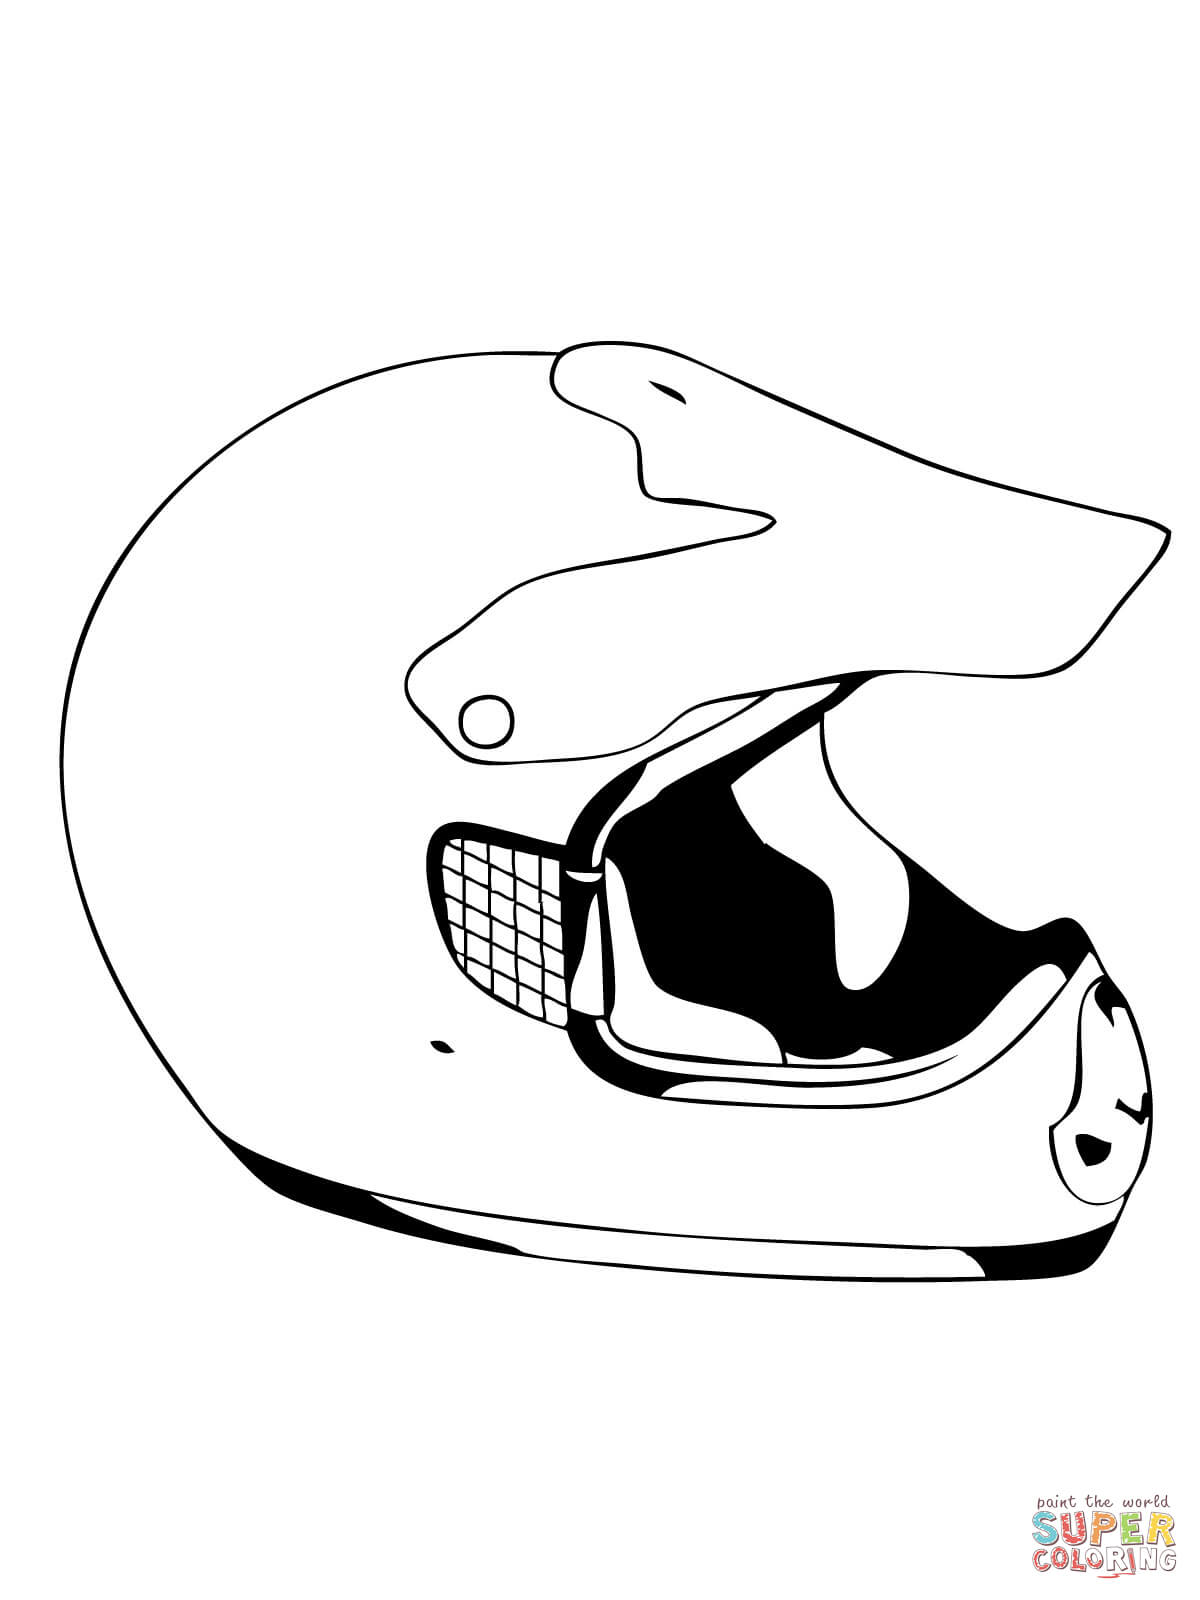 Bicycle Helmet Coloring Page Preschool - Coloring Pages For All Ages